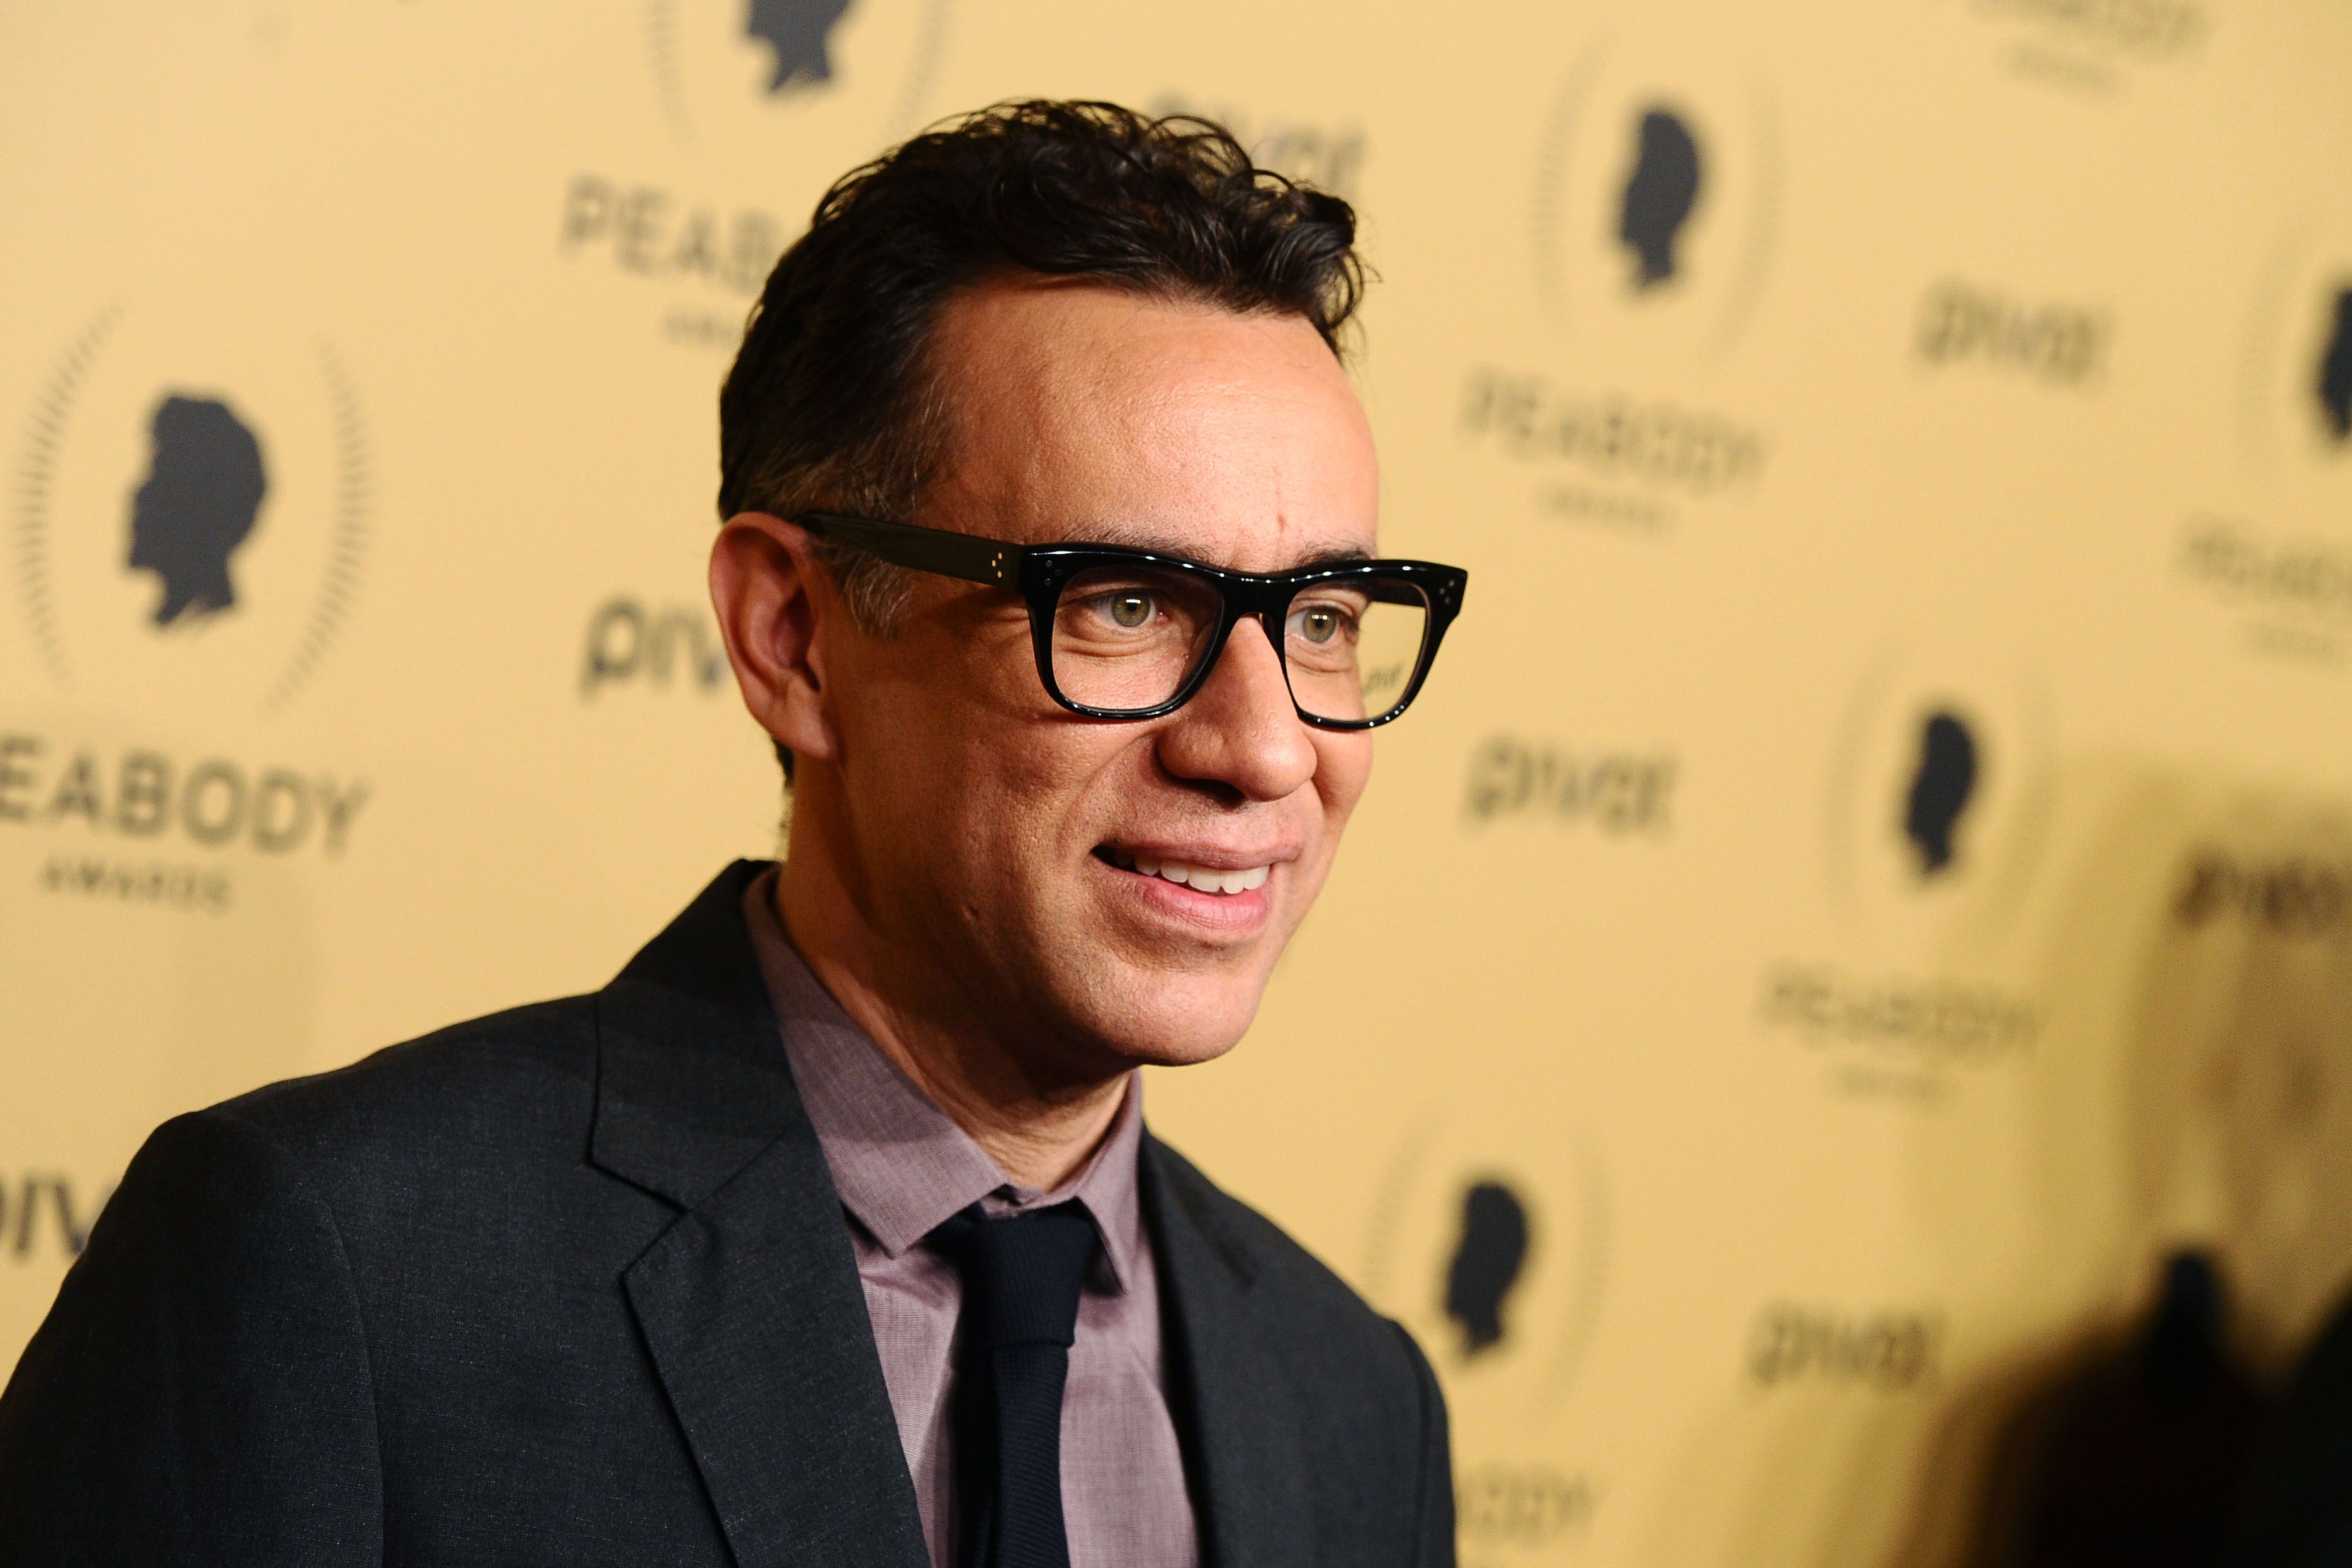 Portlandia star Fred Armisen startled after discovering his grandfather was Korean dancer, spy for Japan The Seattle Times pic